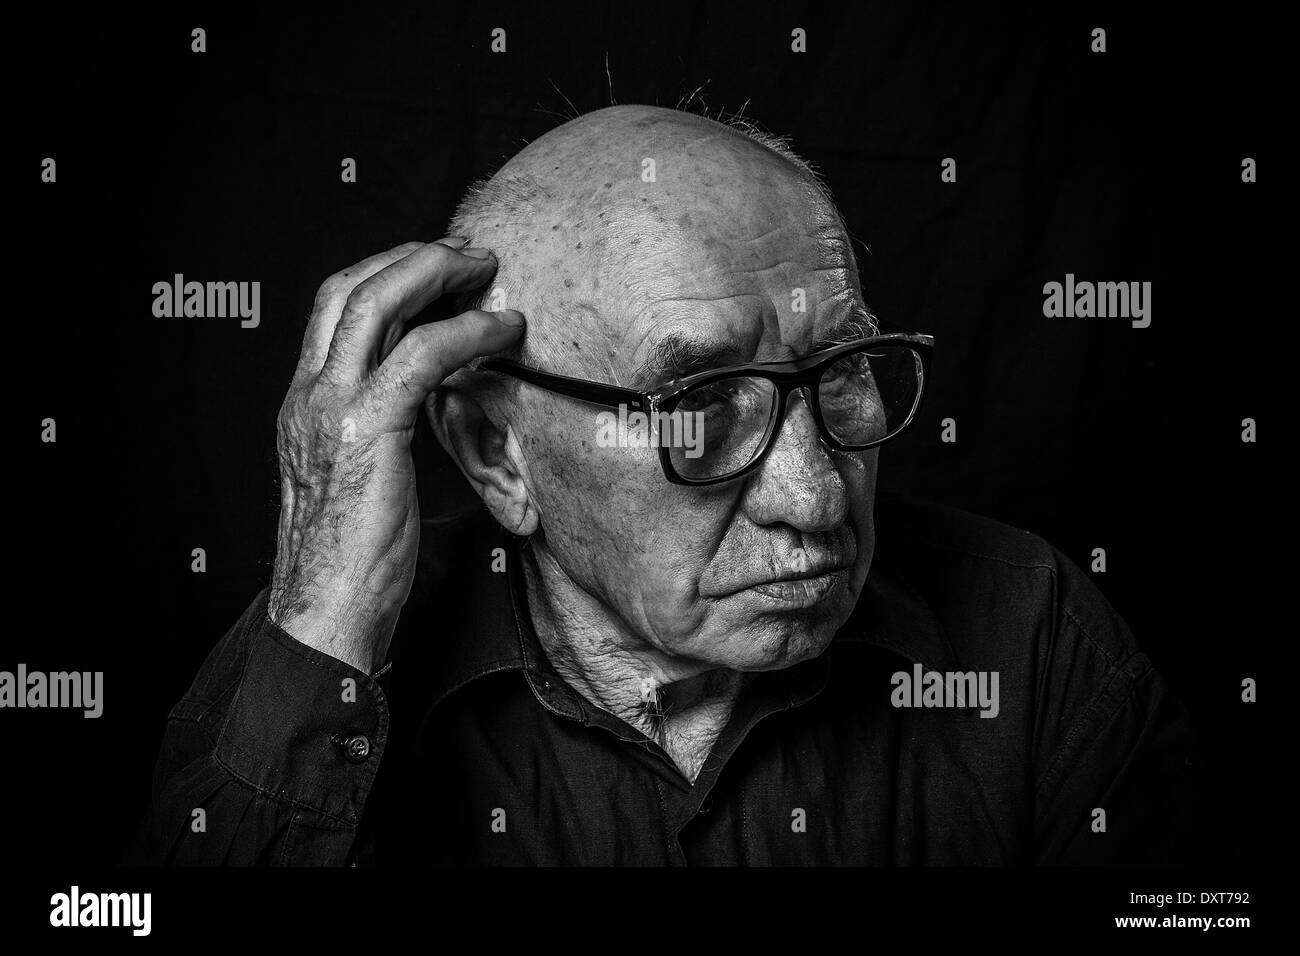 Artistic portrait of an old man with glasses Stock Photo